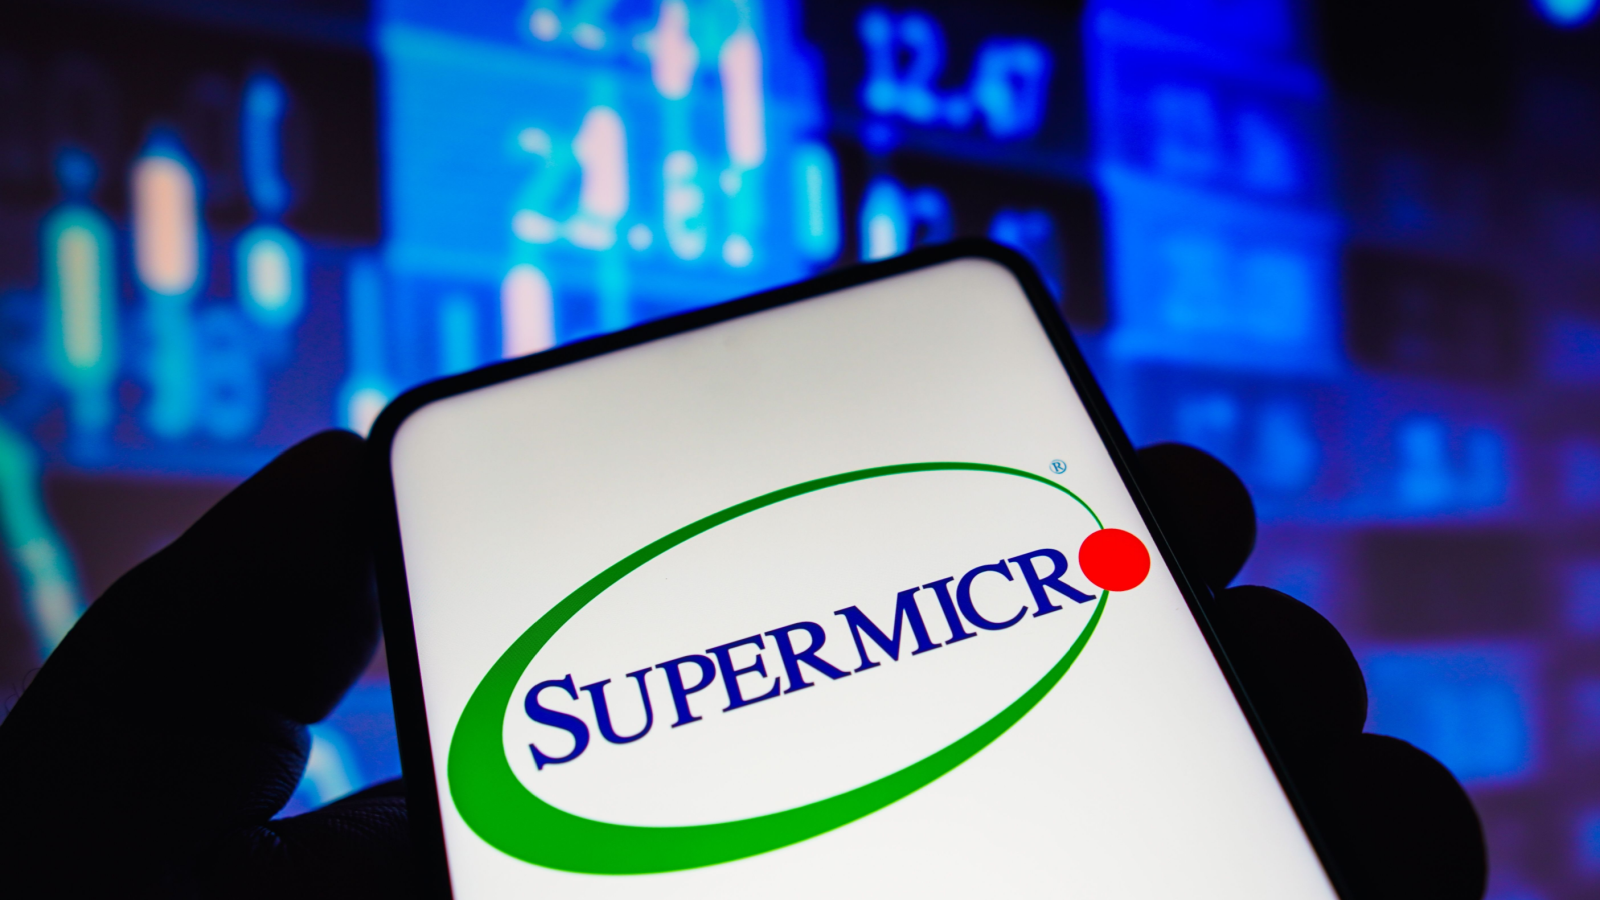 SMCI Stock Analysis: The Bull Run Is Not Over for Super Micro Computer